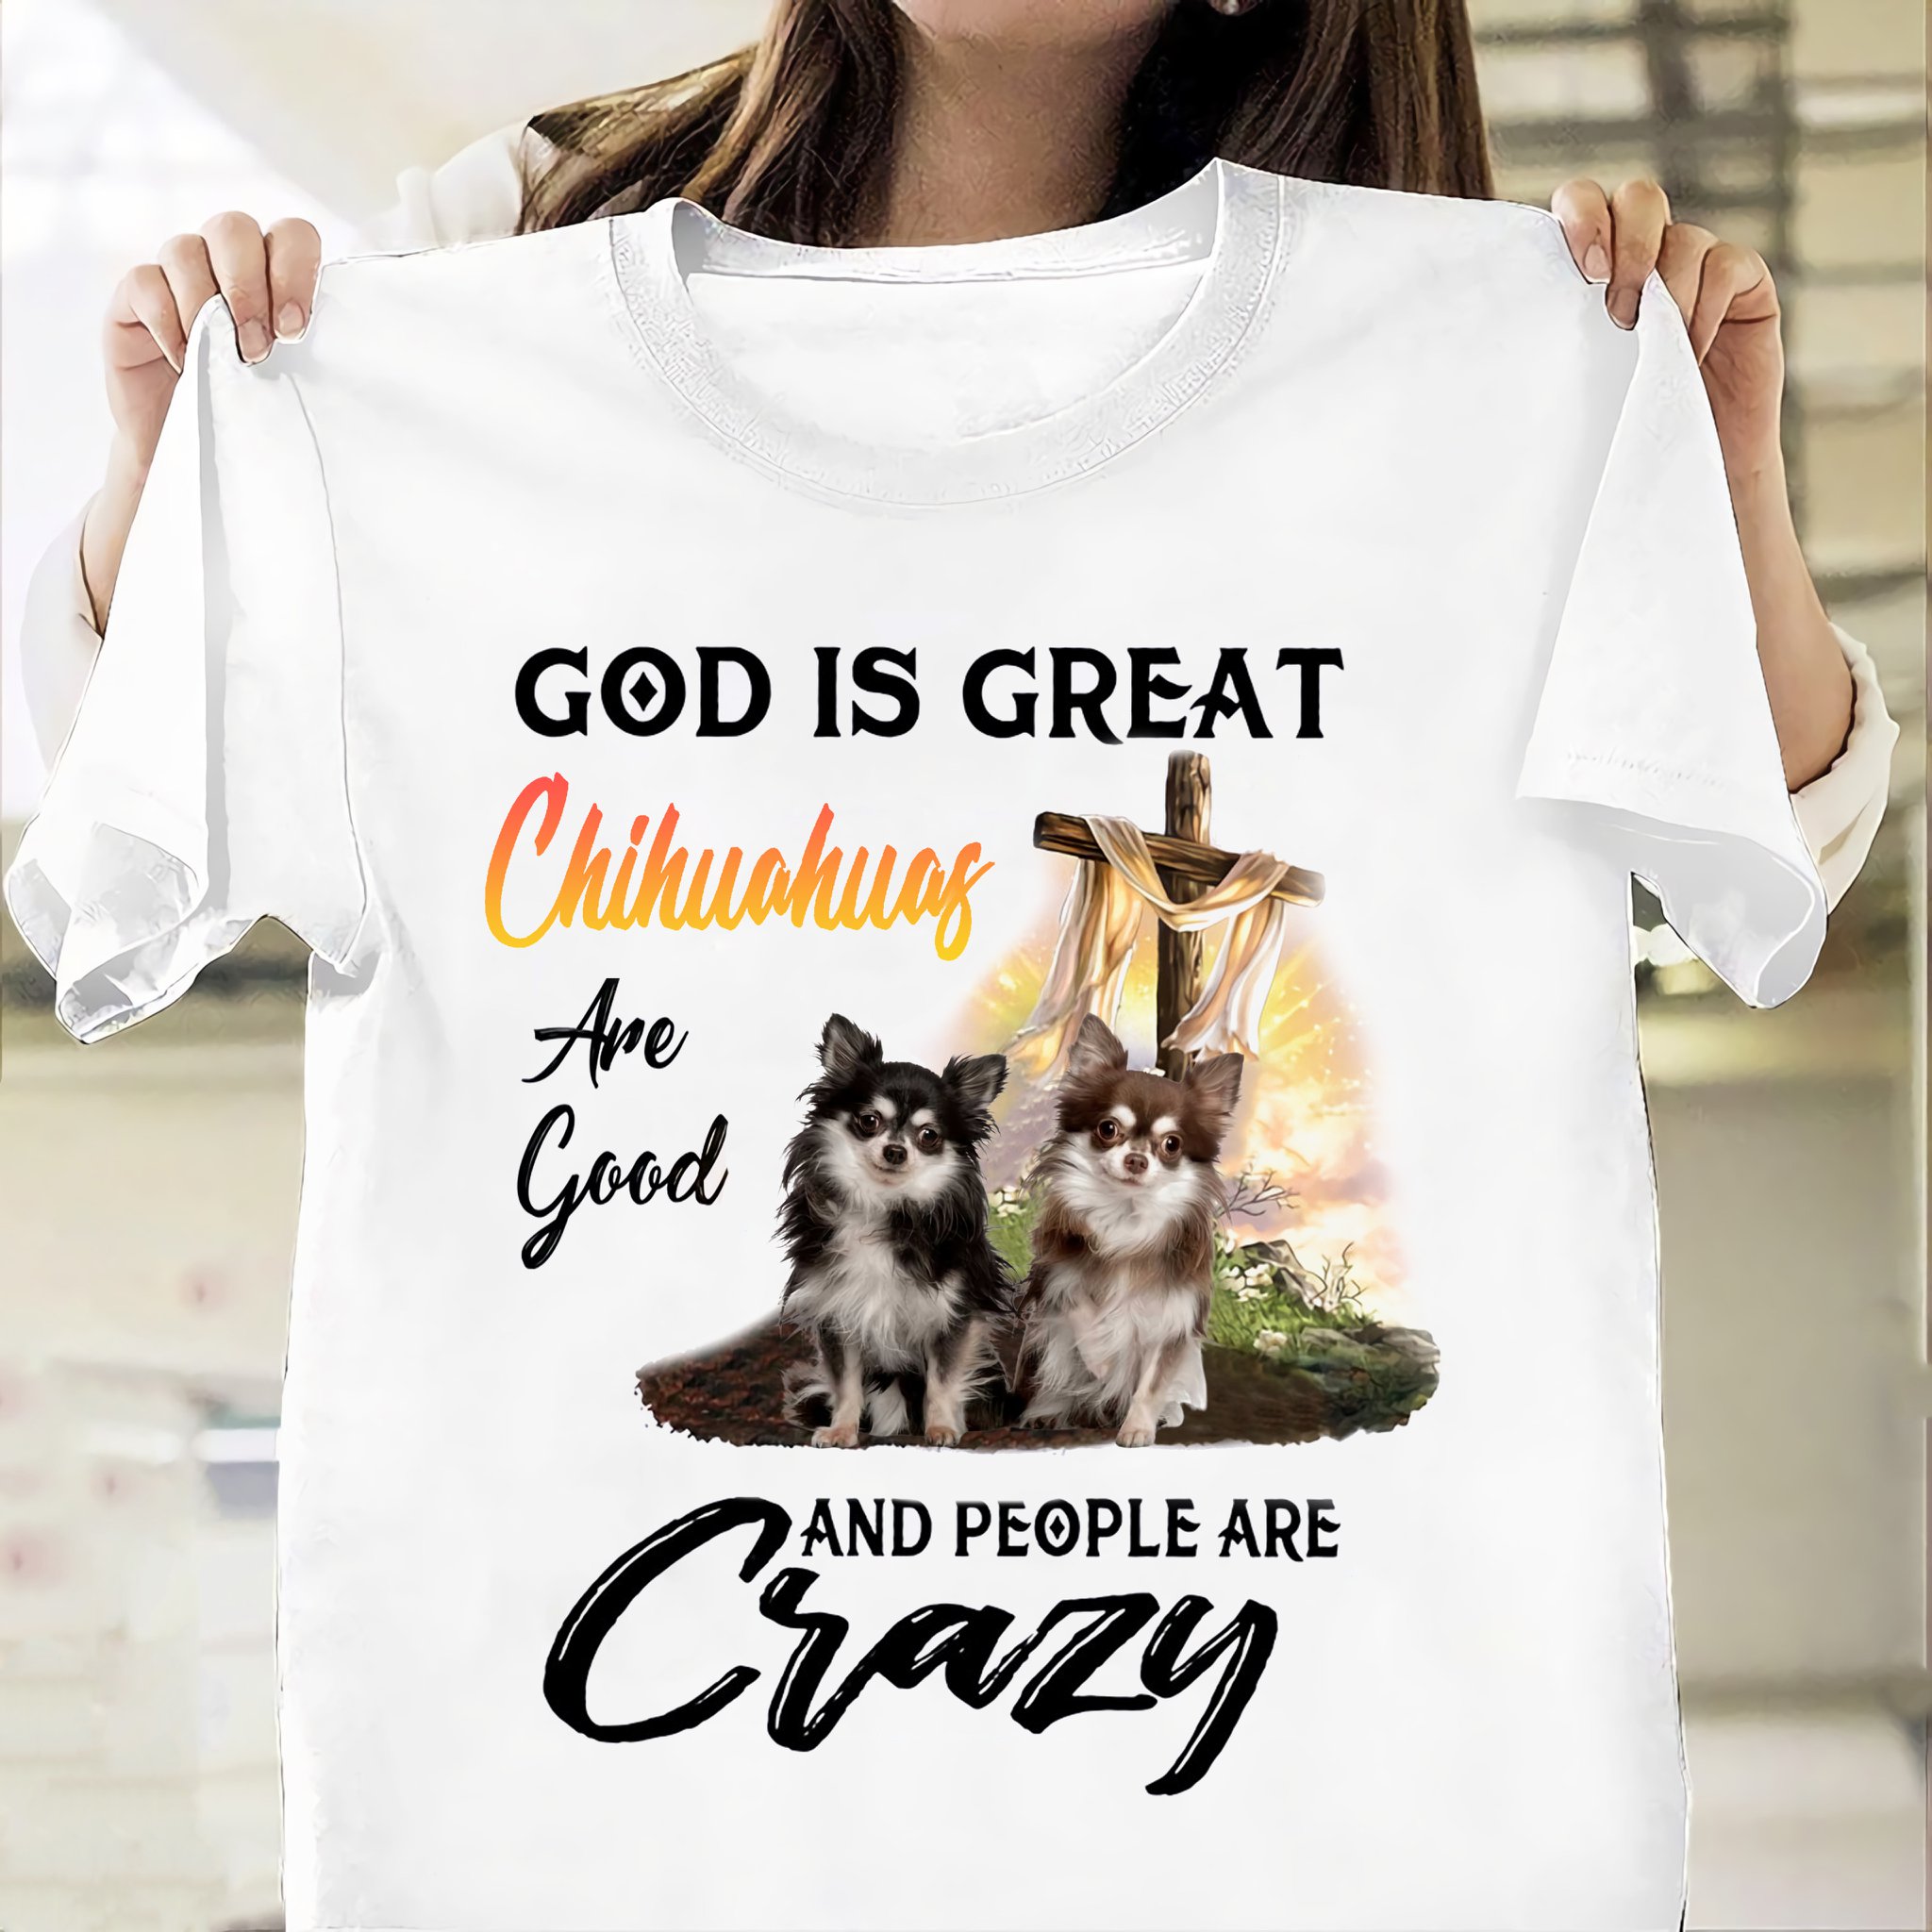 Chihuahua God - God is great chihuahuas are good and people are crazy